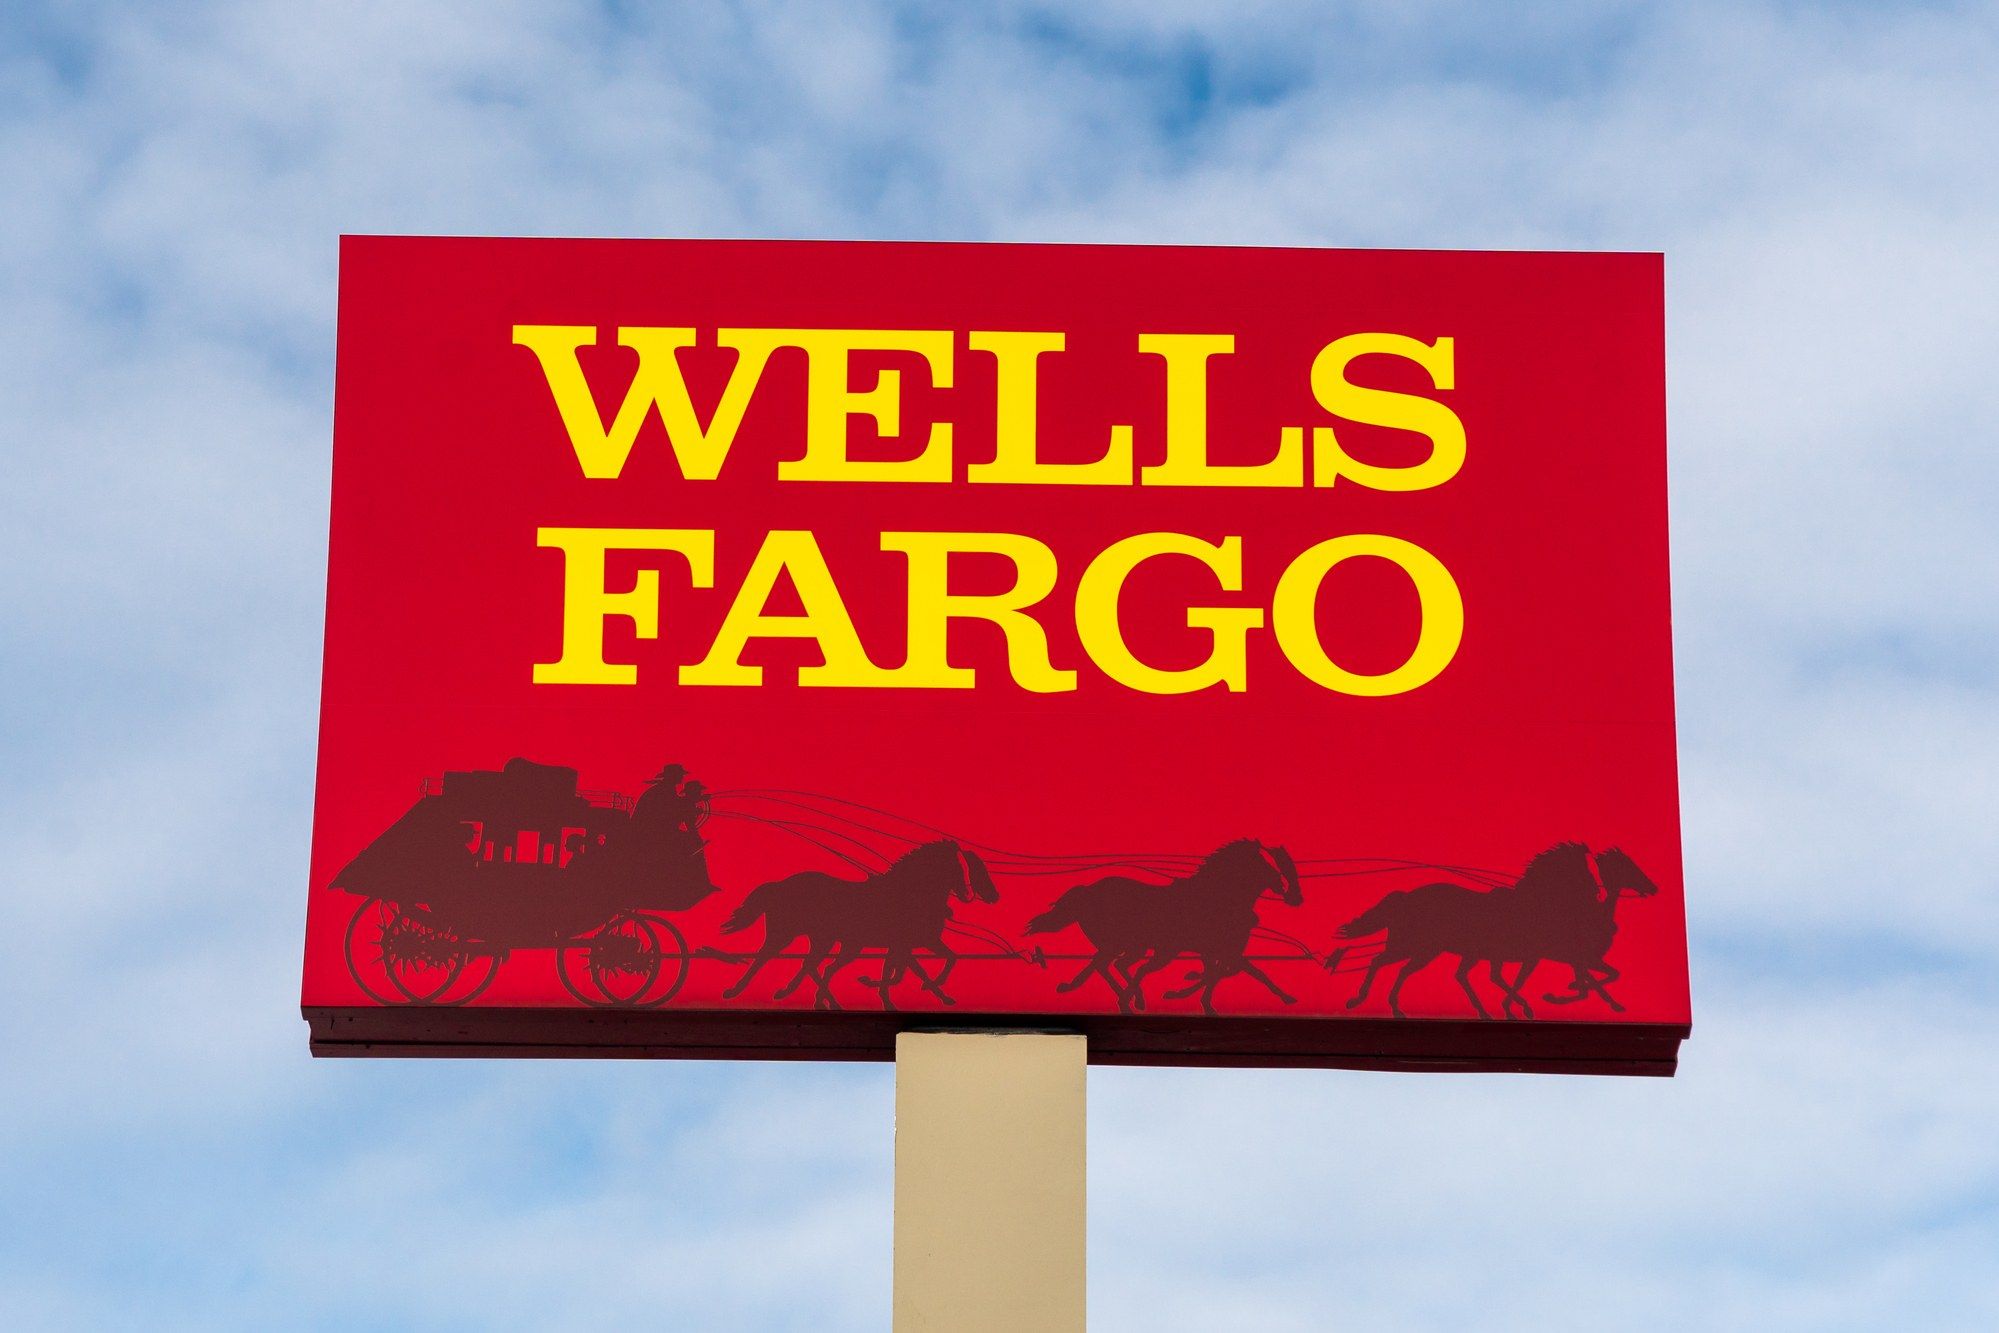 Wells Fargo bank is under investigation for its monthly service fees.